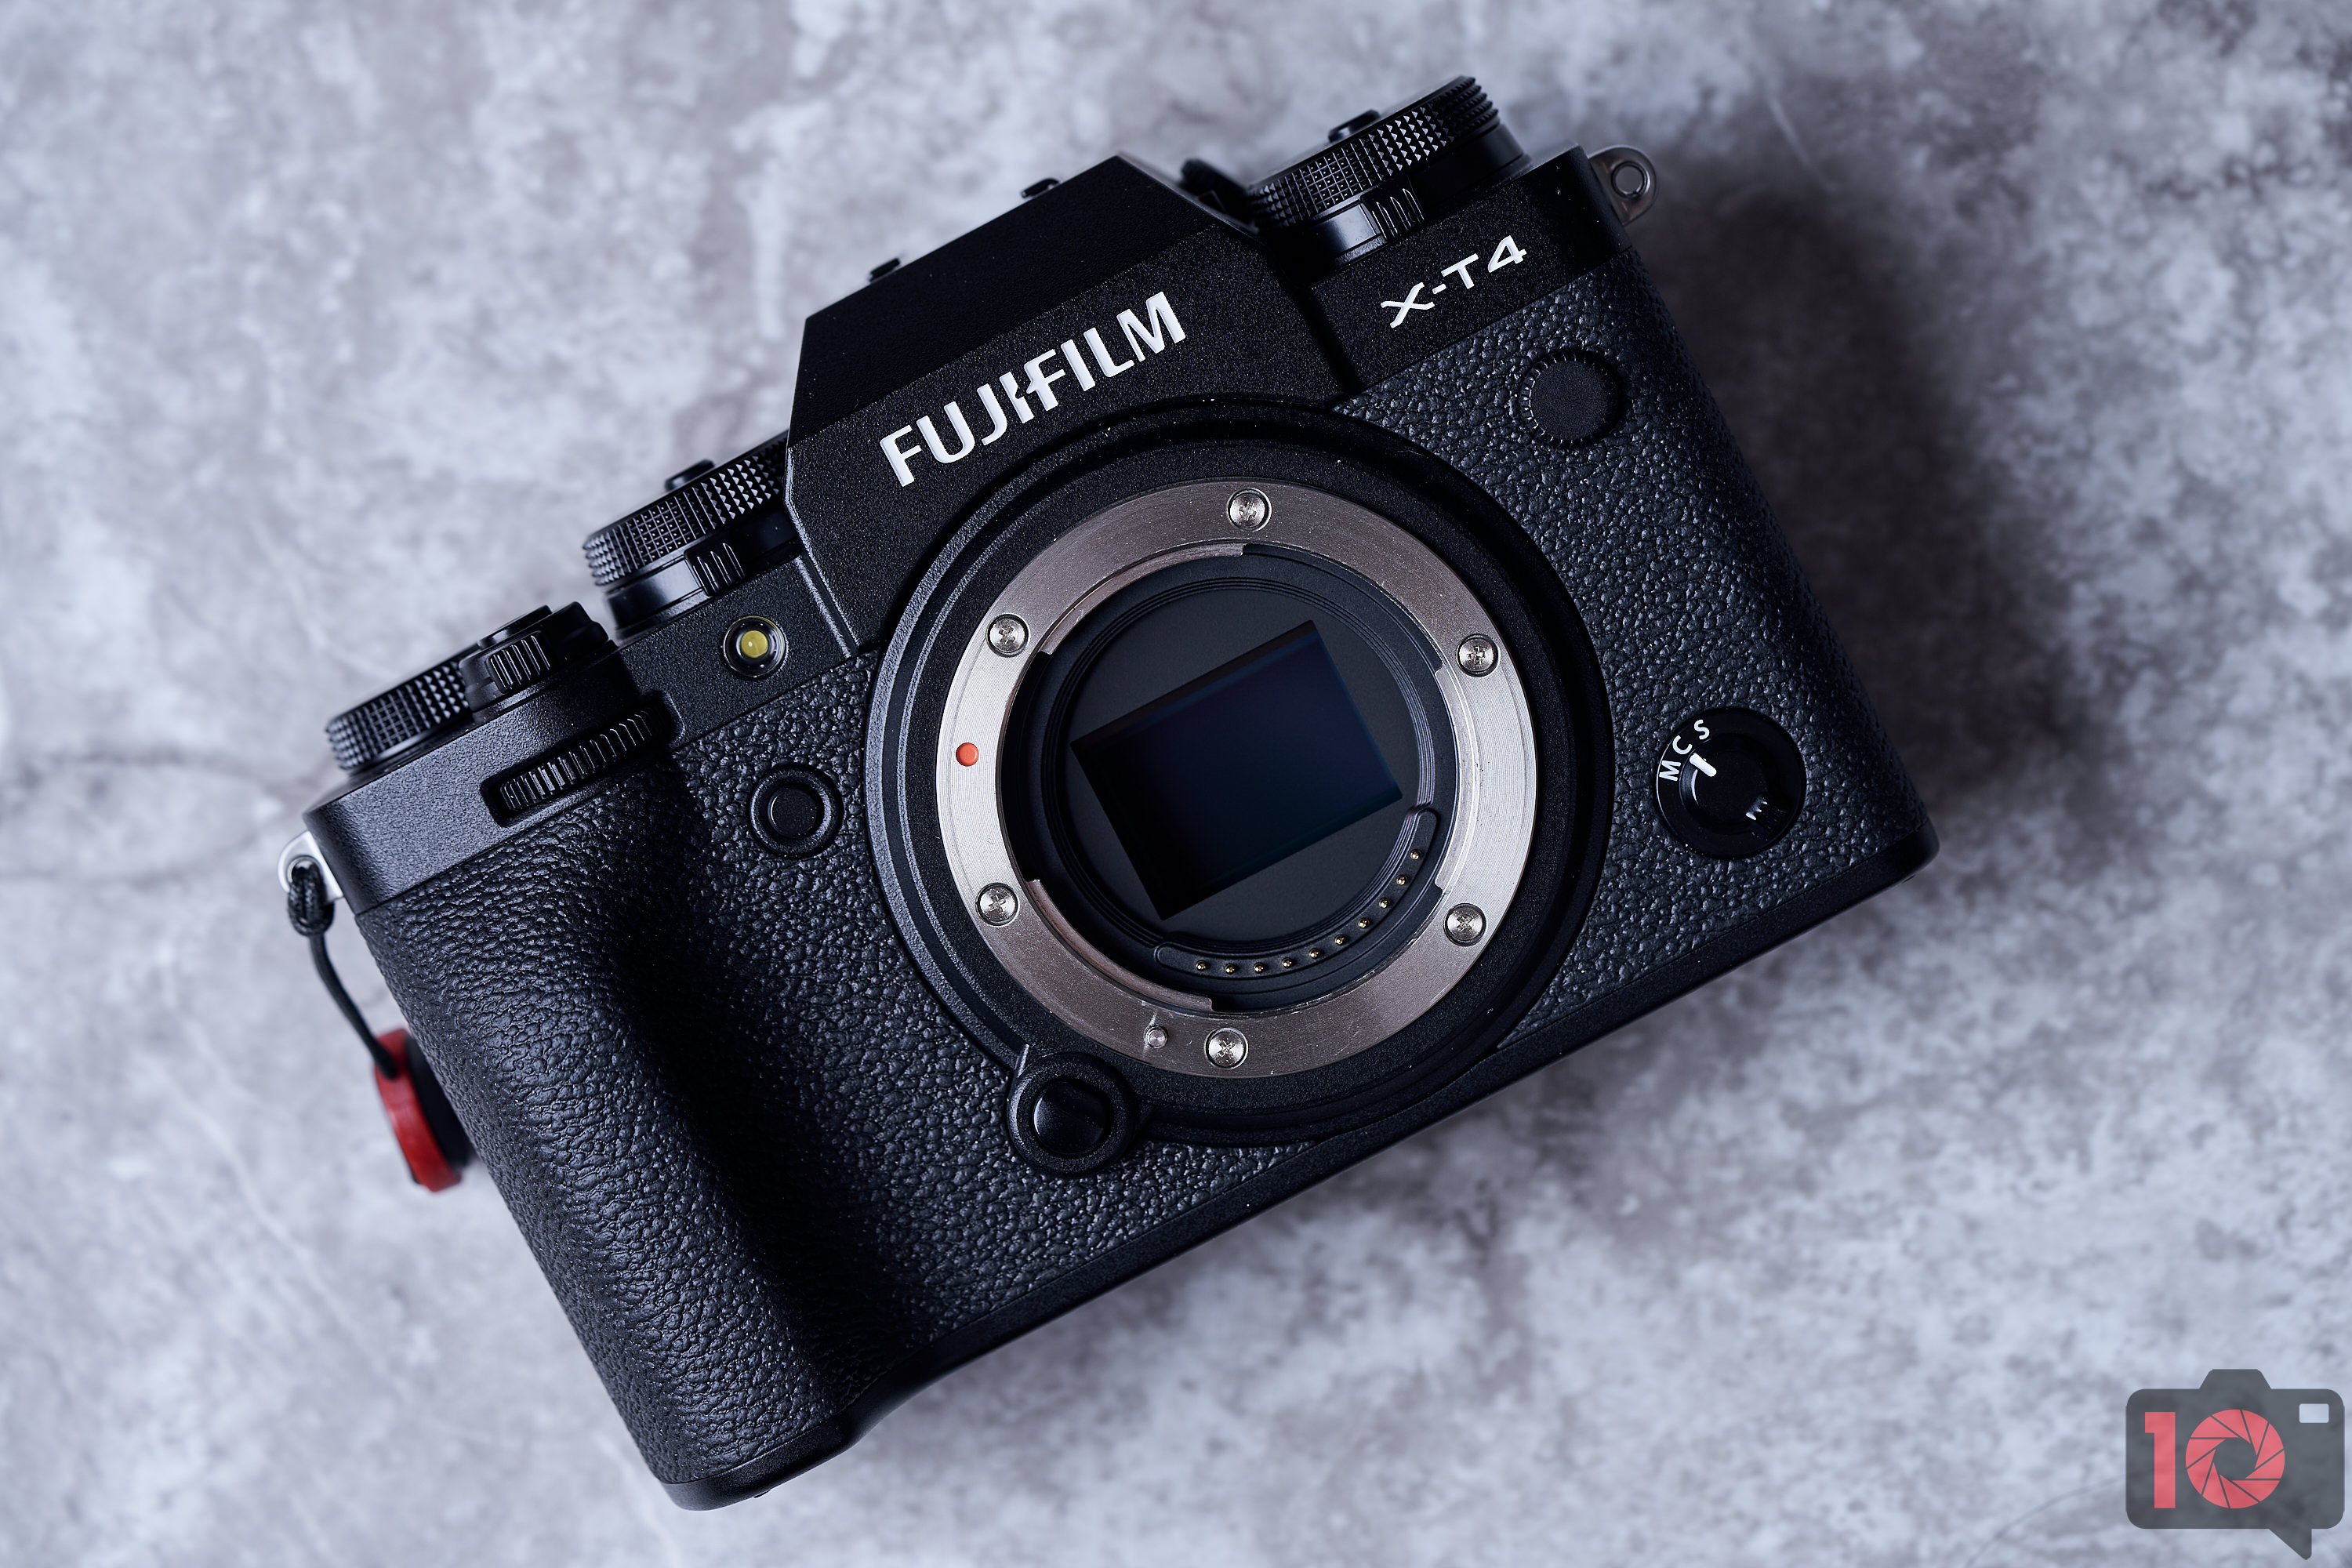 The Fujifilm XT4 Has a Discount and 5 Stars From Us!